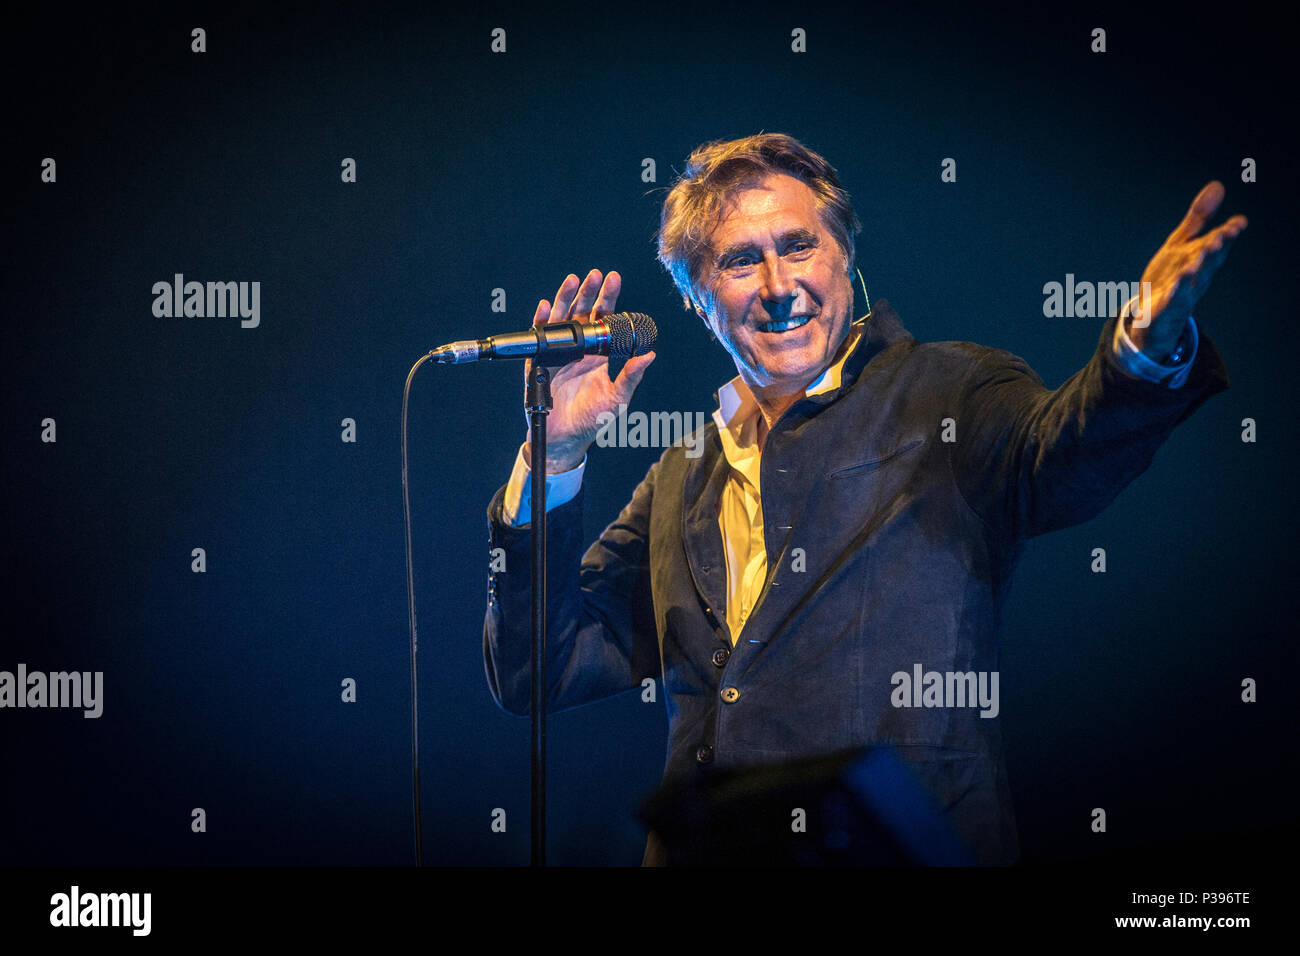 Roskilde, Denmark. June 17, 2018. The English singer and songwriter Bryan Ferry performs a live concert at Roskilde Kongrescenter in Roskilde. (Photo credit: Gonzales Photo - Thomas Rasmussen). Credit: Gonzales Photo/Alamy Live News Stock Photo